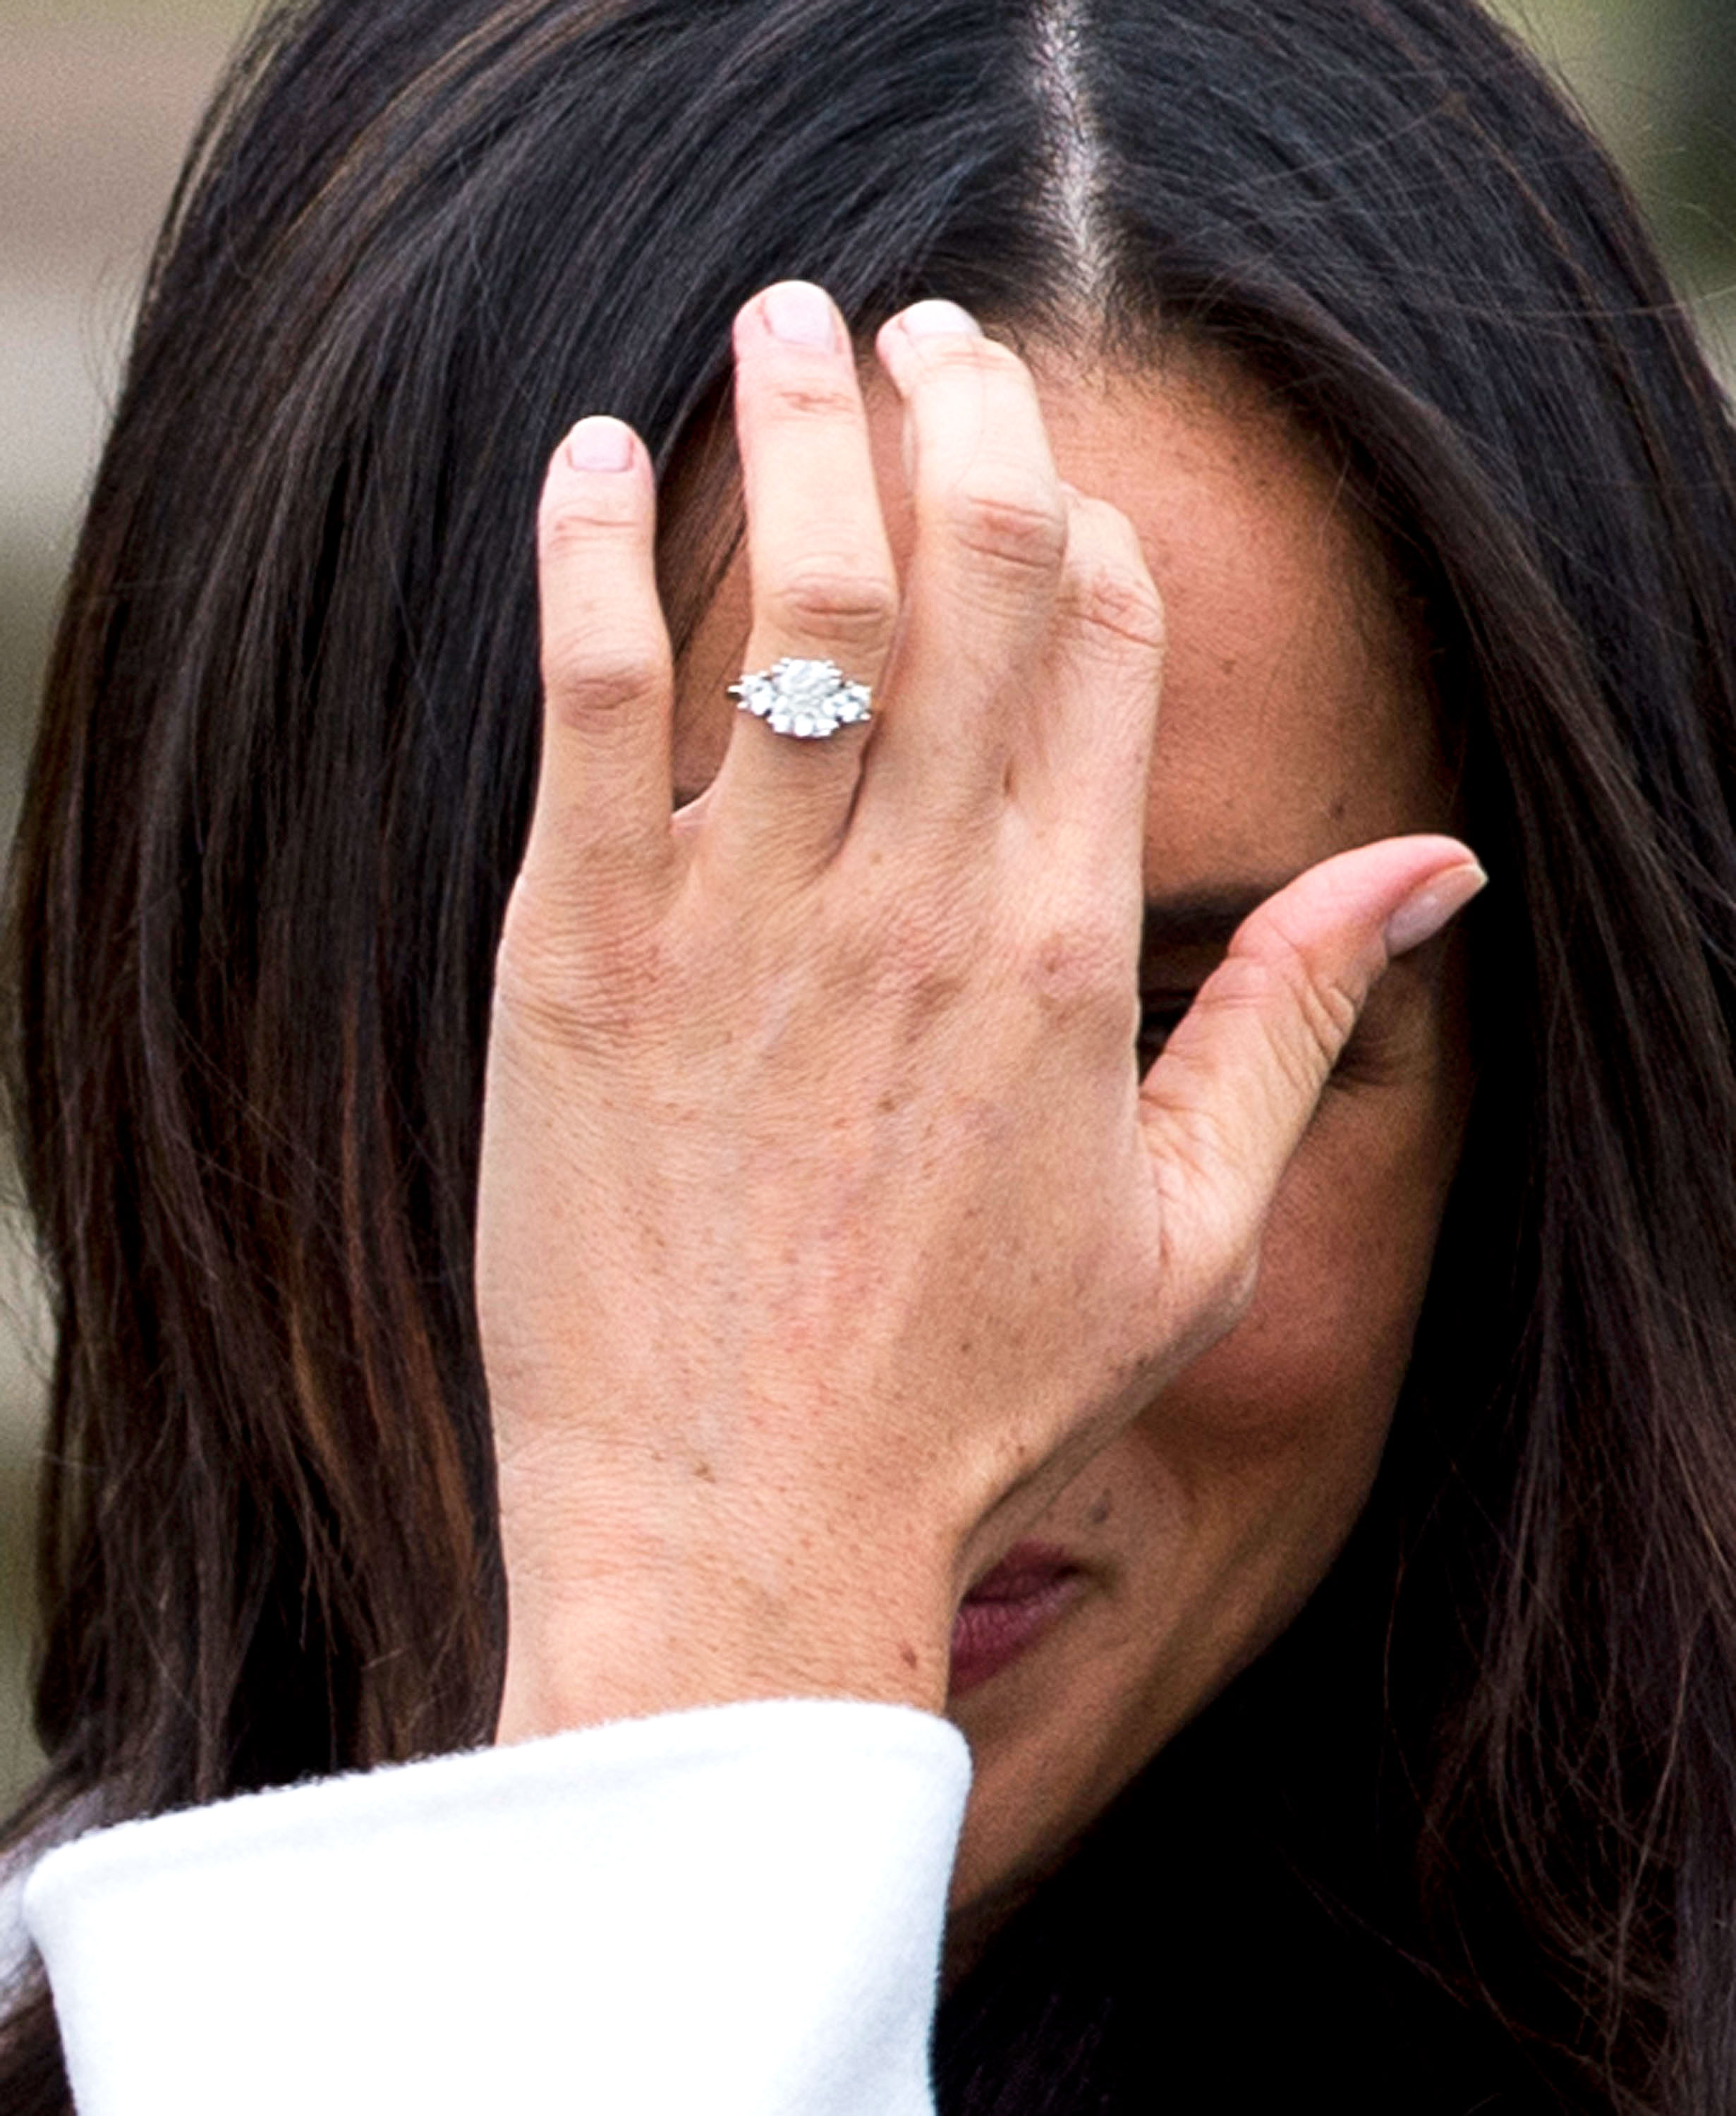 Meghan Markle had her engagement ring altered but it wasn't her choice -  claim | Express.co.uk